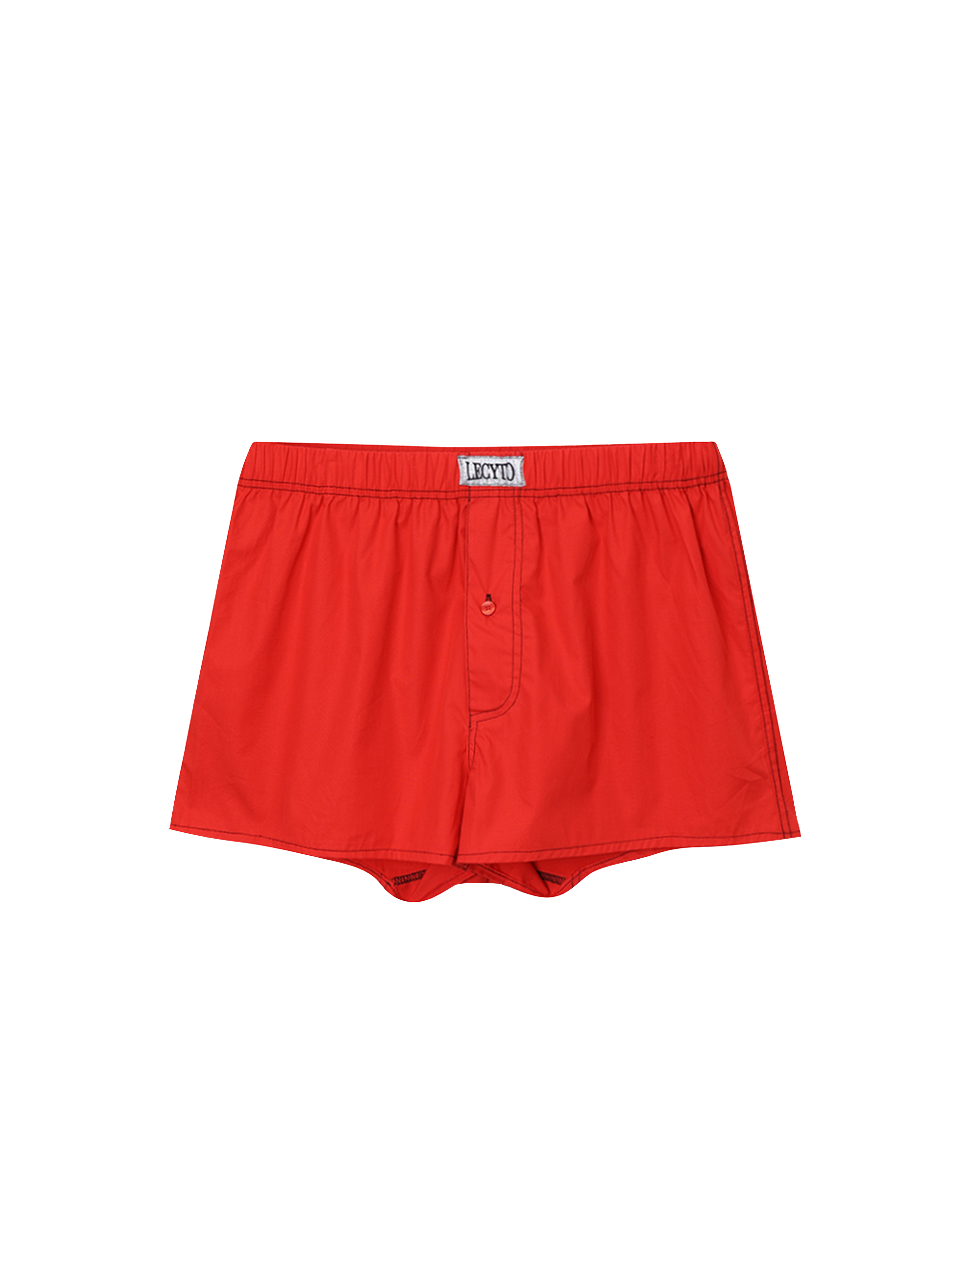 Layered Trunk Pants - Red